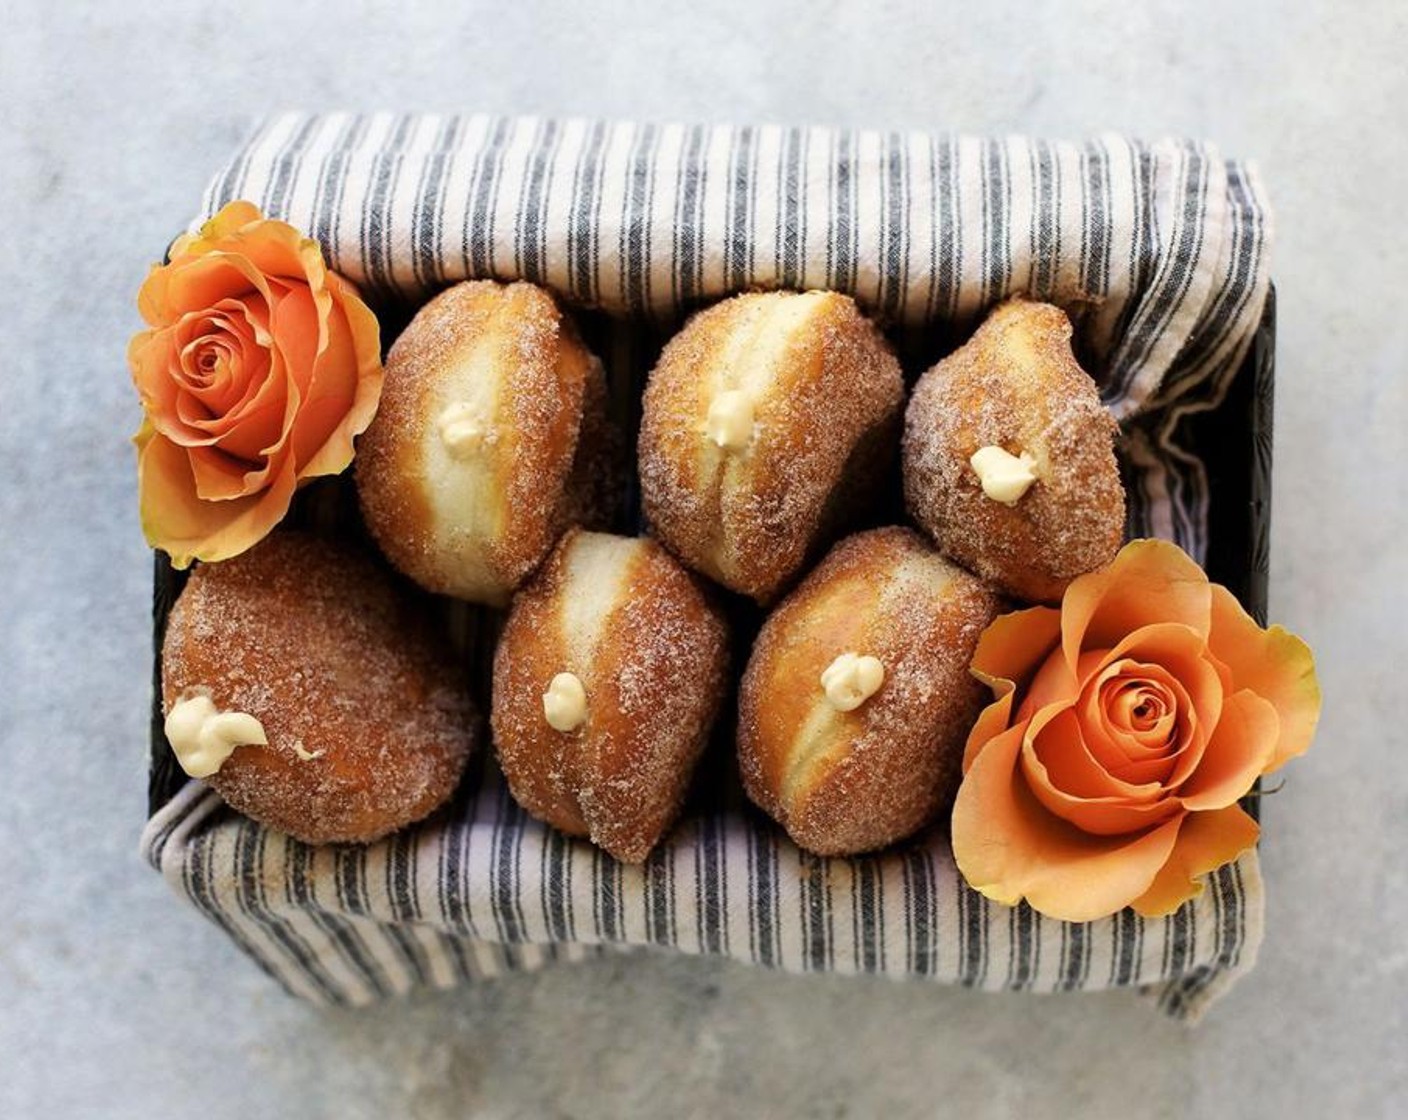 Salted Caramel Cream Cheese Filled Cinnamon and Sugar Donut